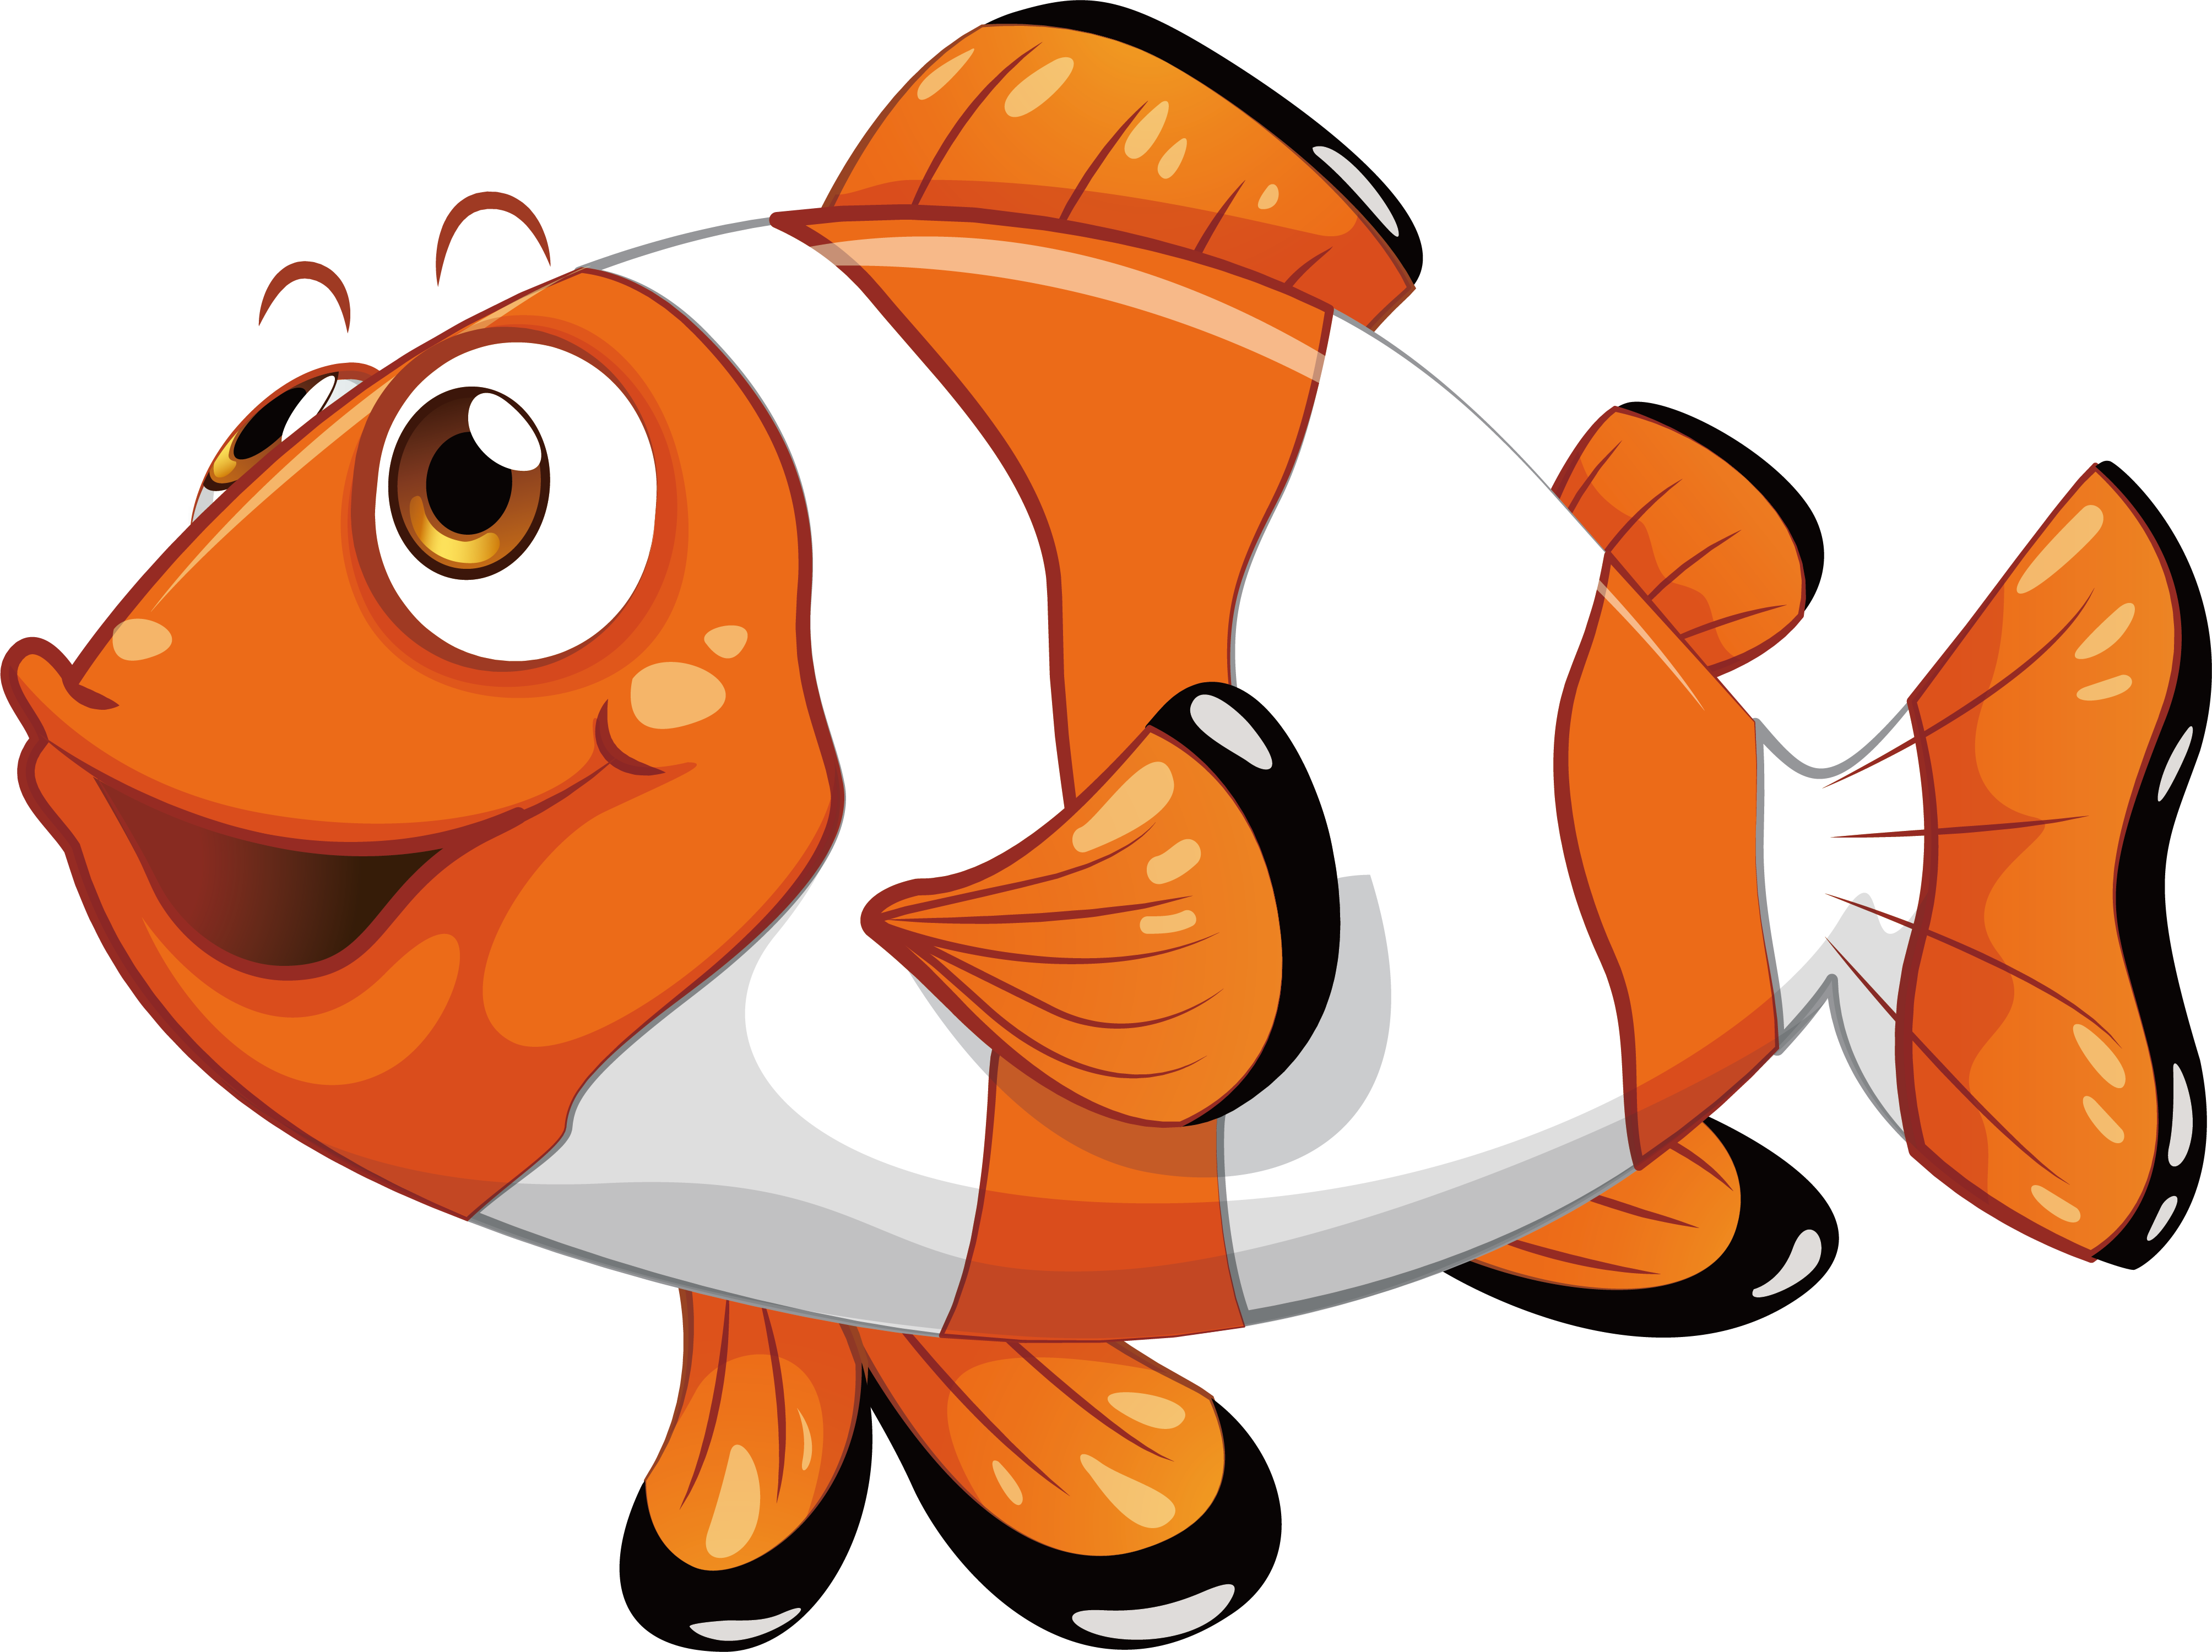 Royalty free clip art. Foods clipart fish